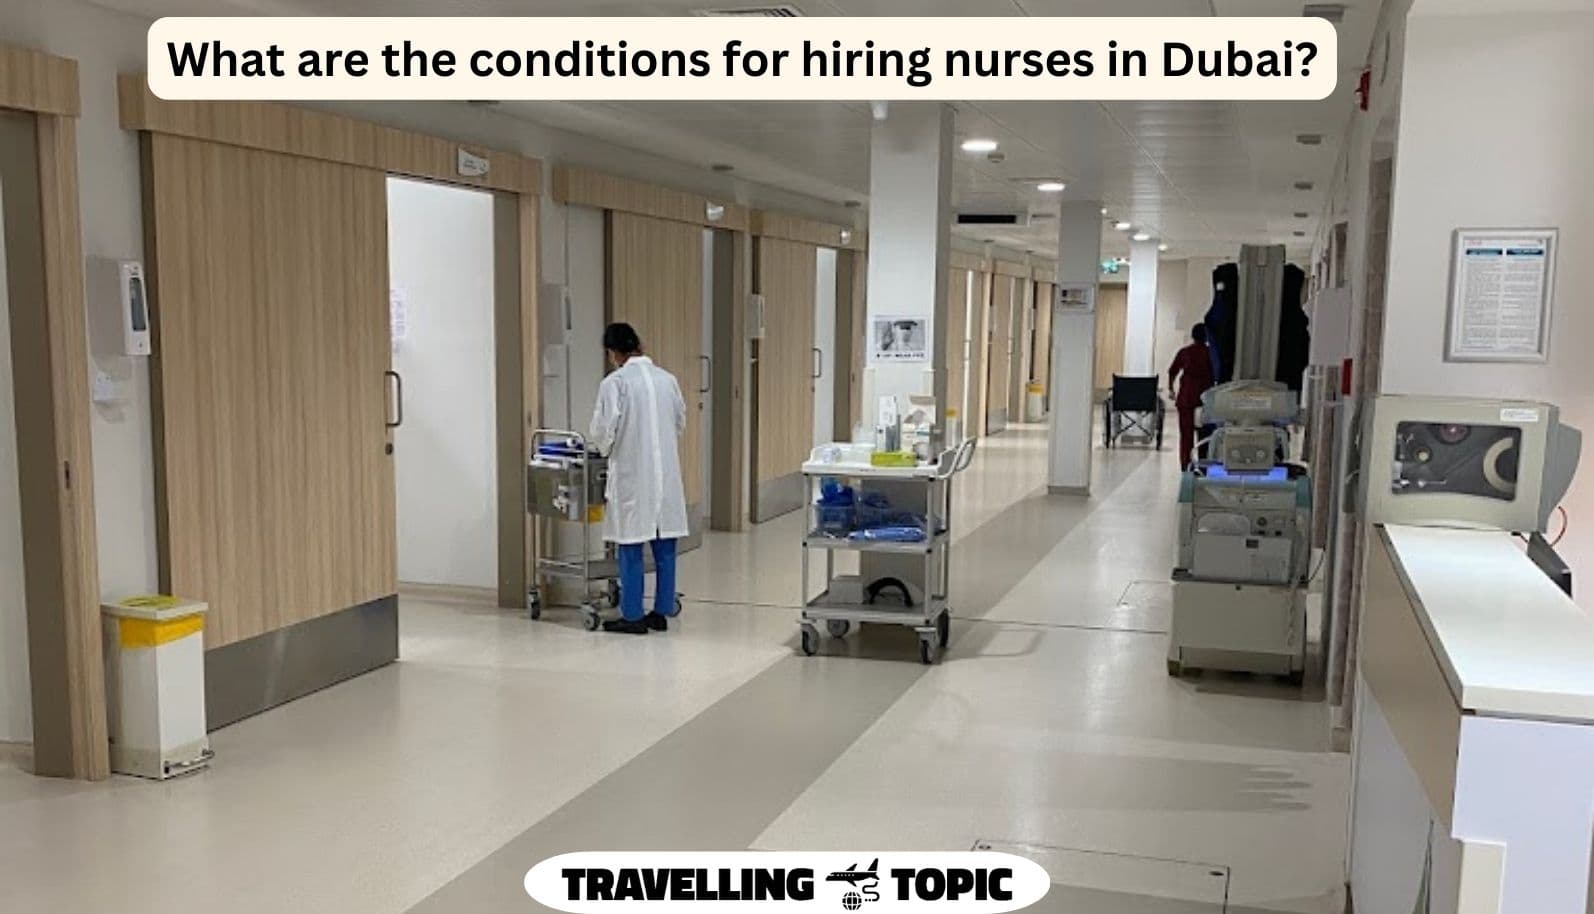 What are the conditions for hiring nurses in Dubai